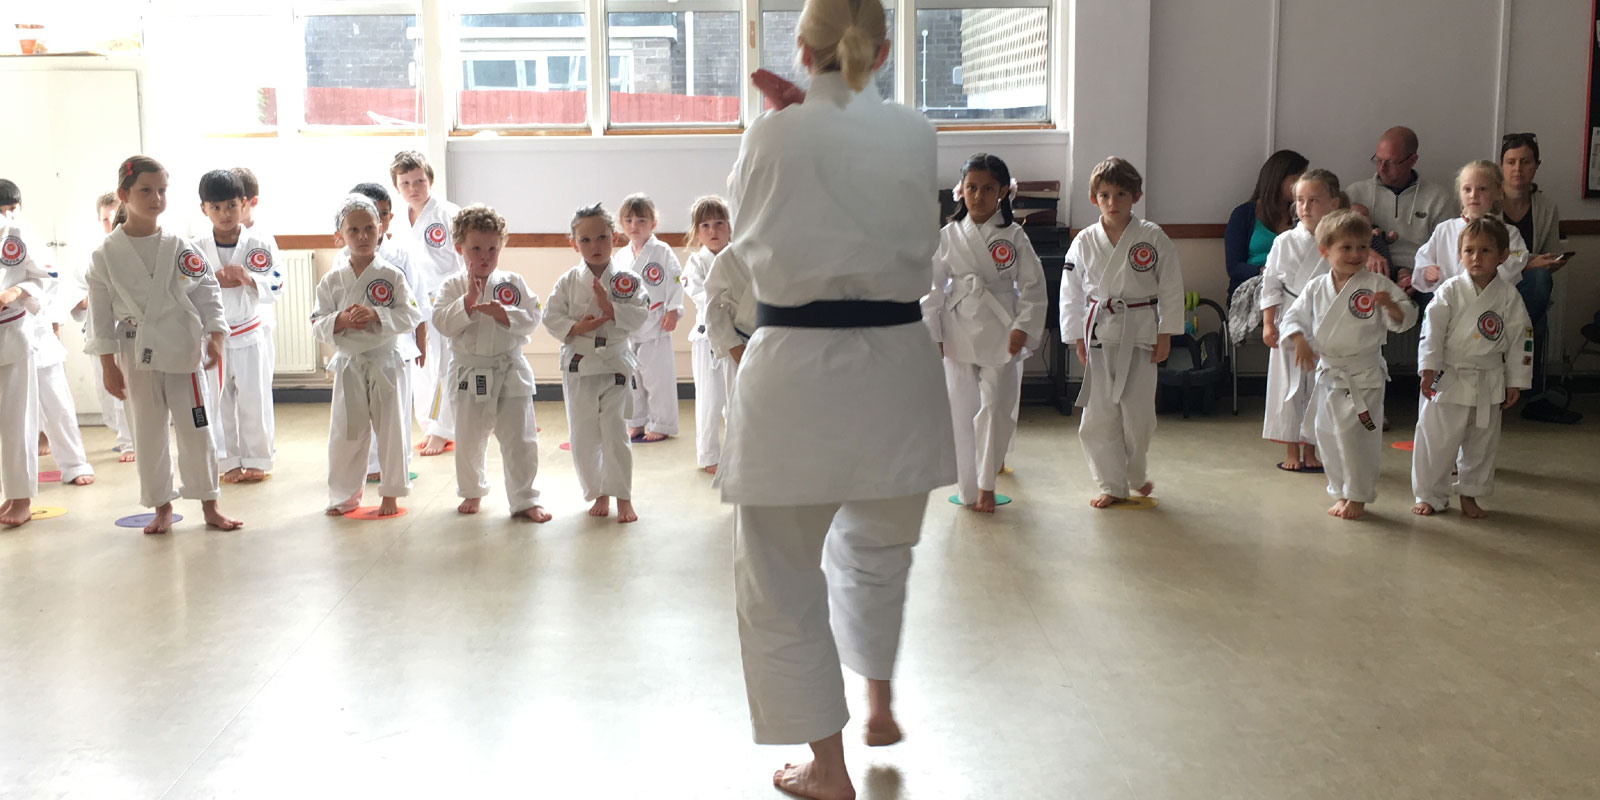 Tots and infant karate classes